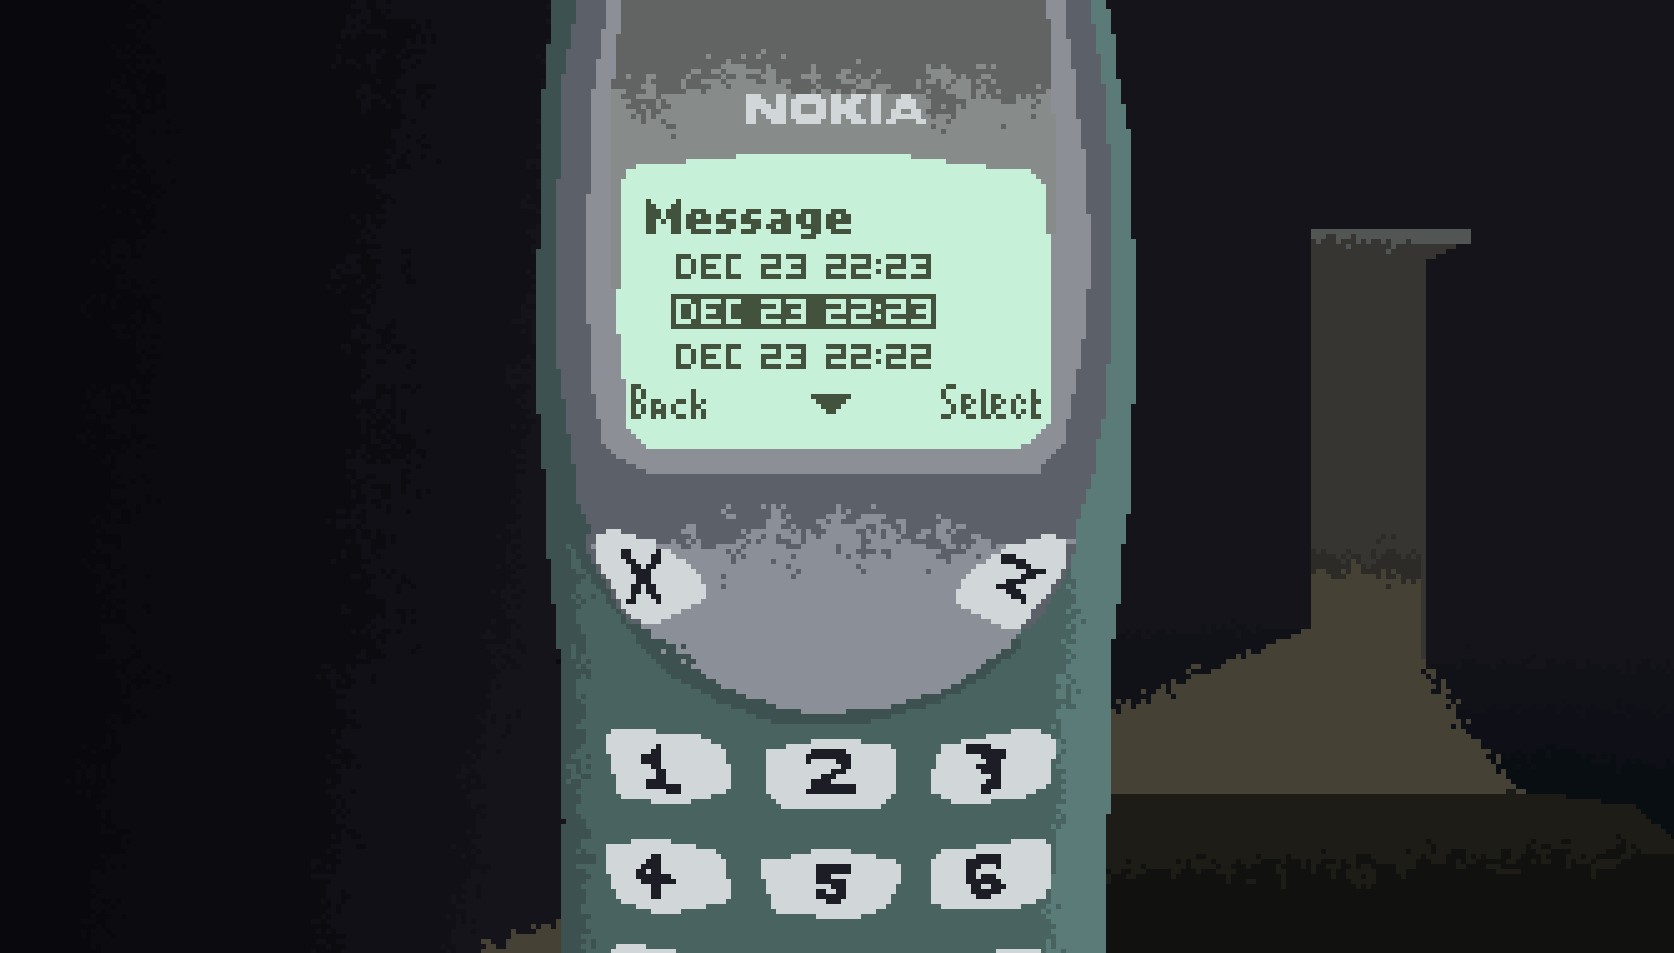 How to Play the New Nokia Snake Game (3310 fame) on FB Messenger